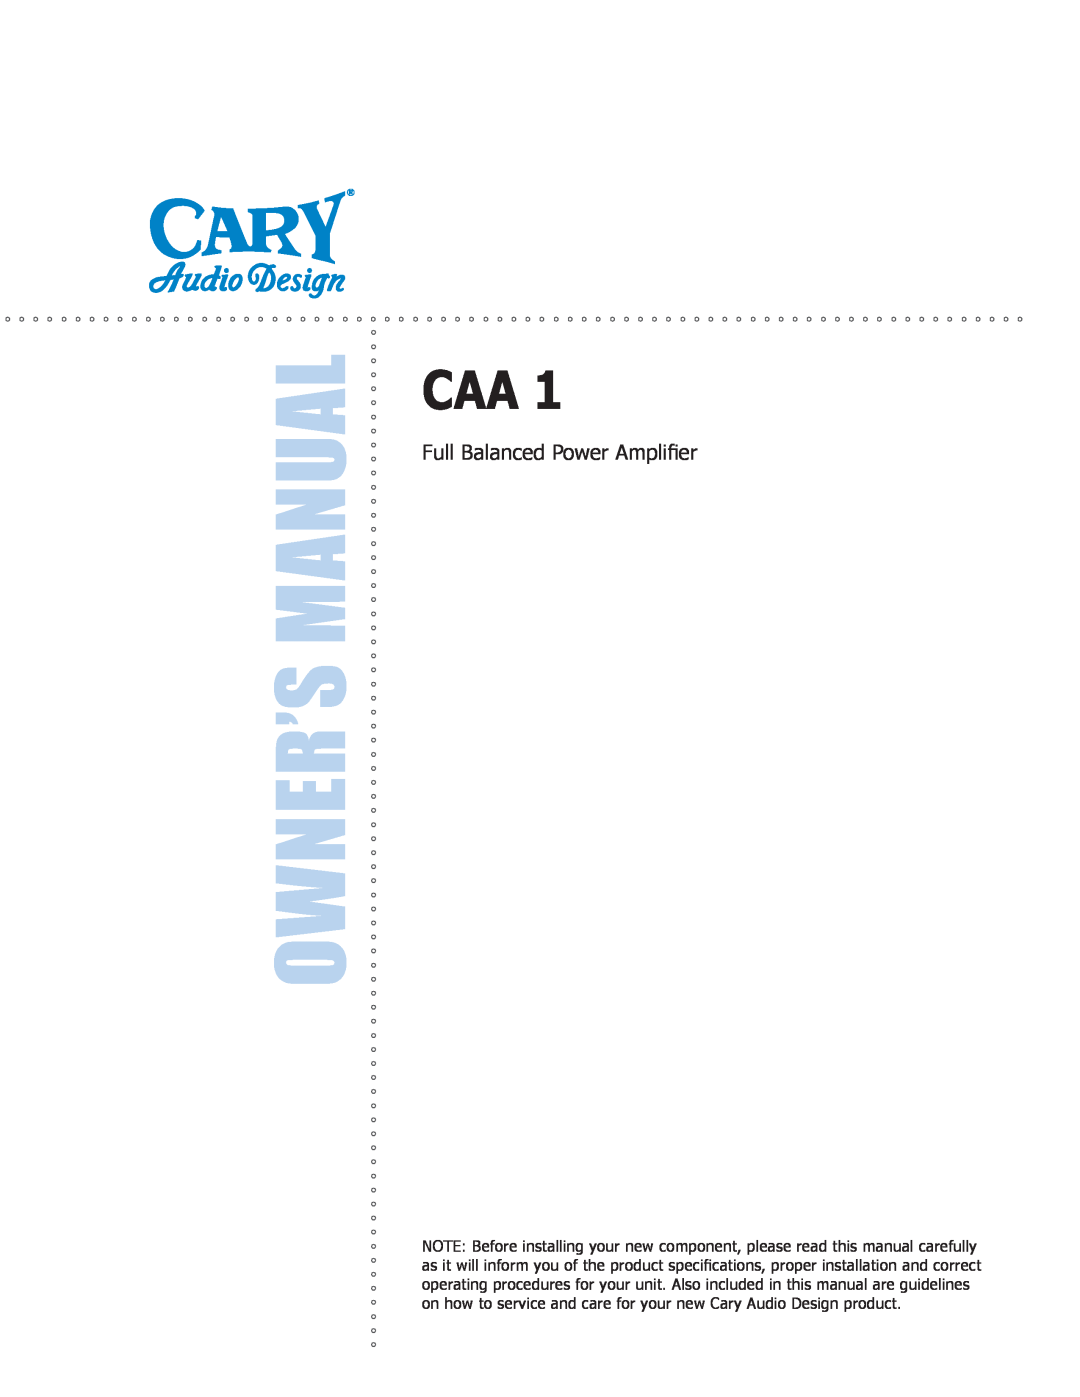 Cary Audio Design CAA 1 owner manual Full Balanced Power Amplifier 